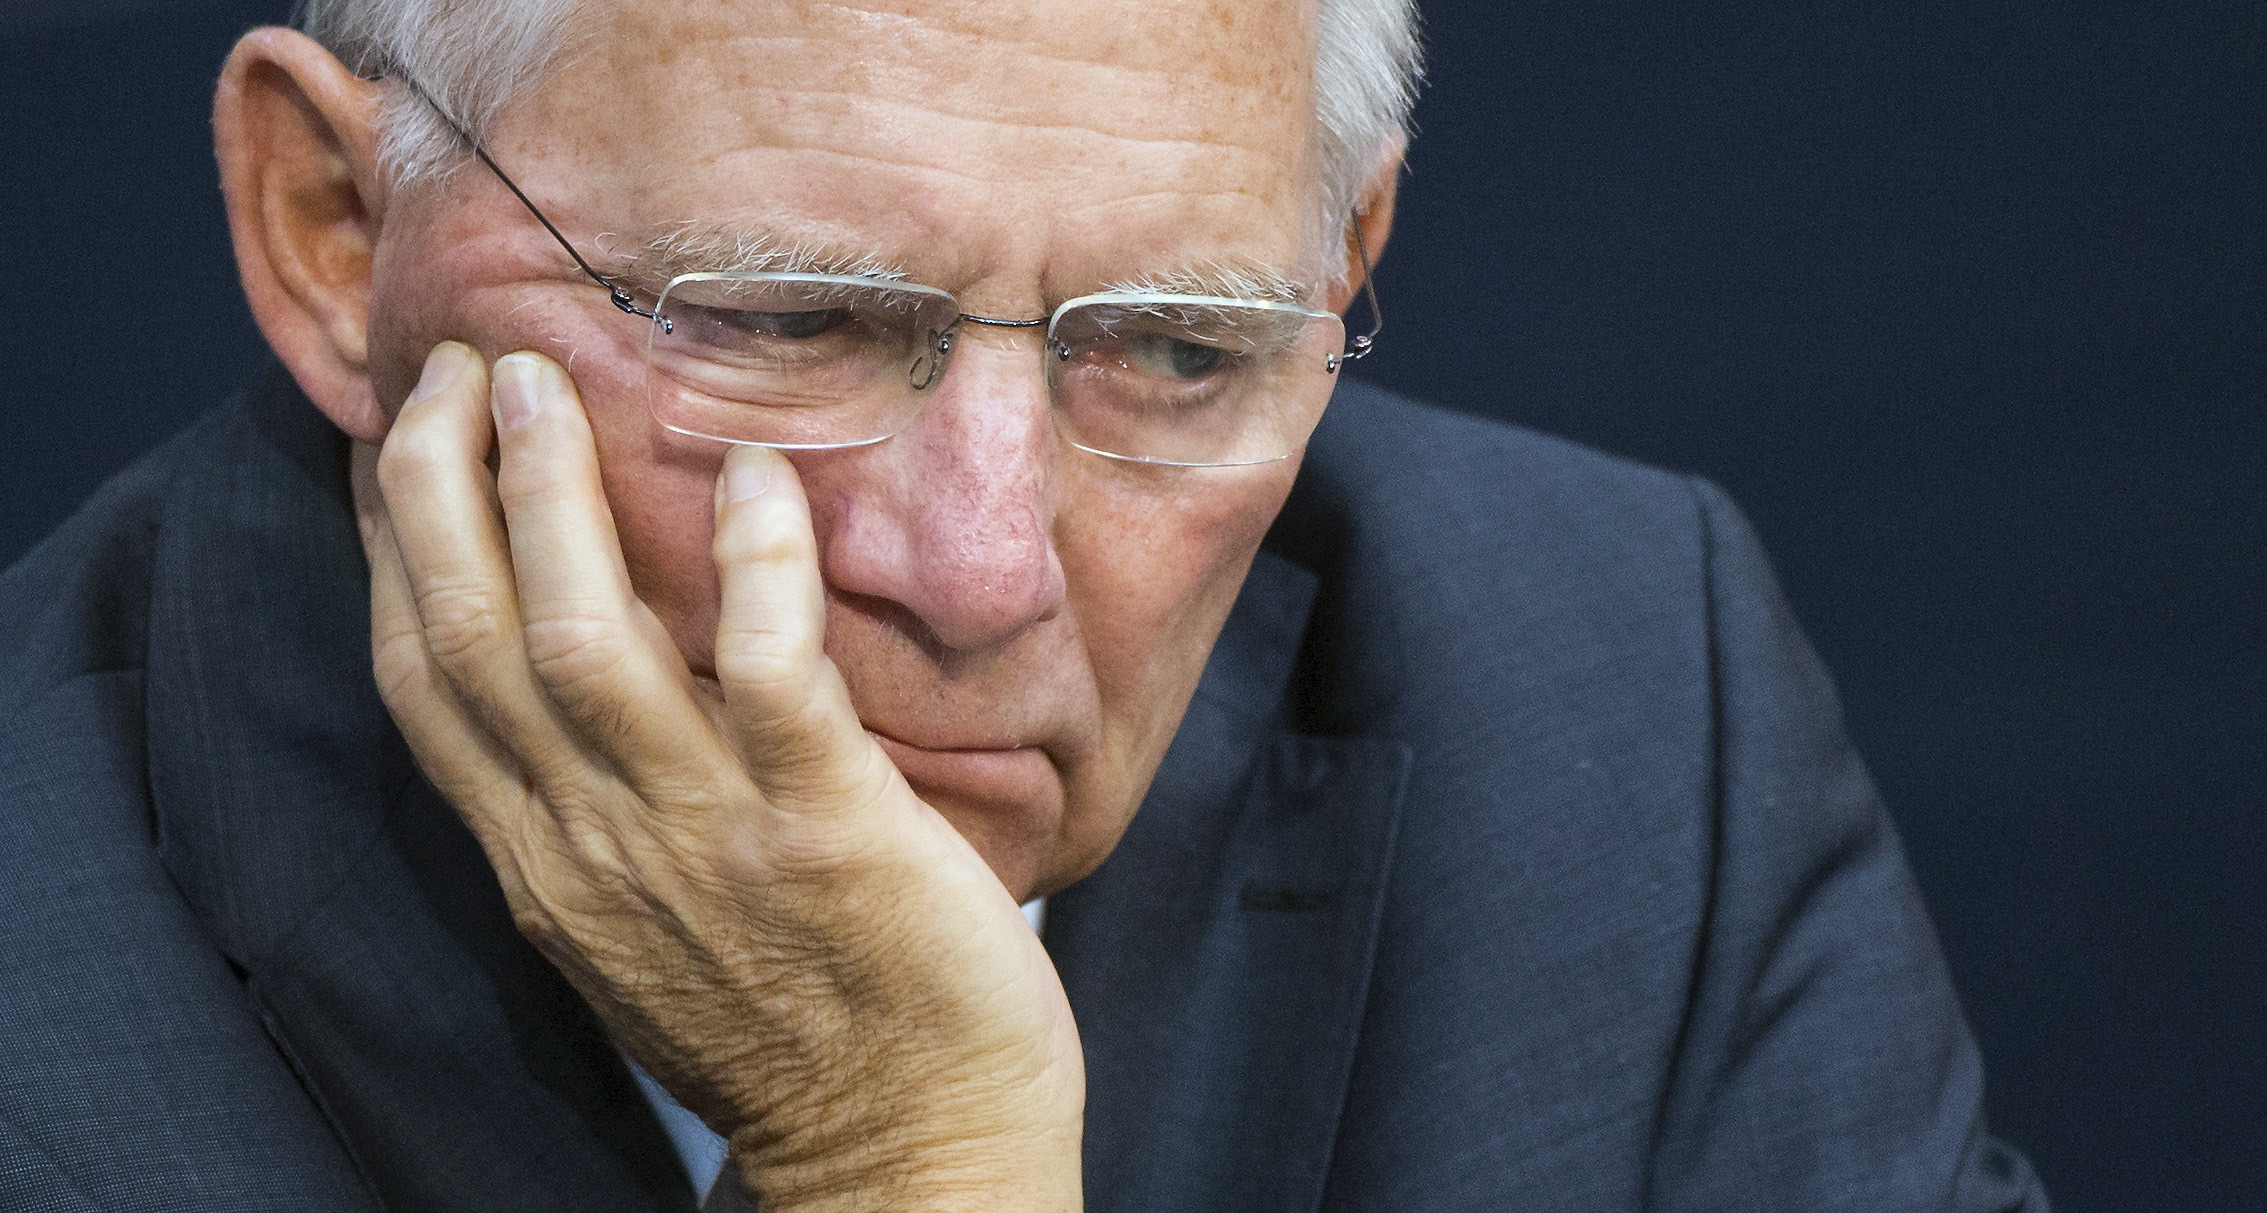 German Finance Minister Wolfgang Sch&auml;uble attends a session of the lower house of Parliament, the Bundestag, in Berlin on Nov. 6, 2015 (Hannibal Hanschke—Reuters)